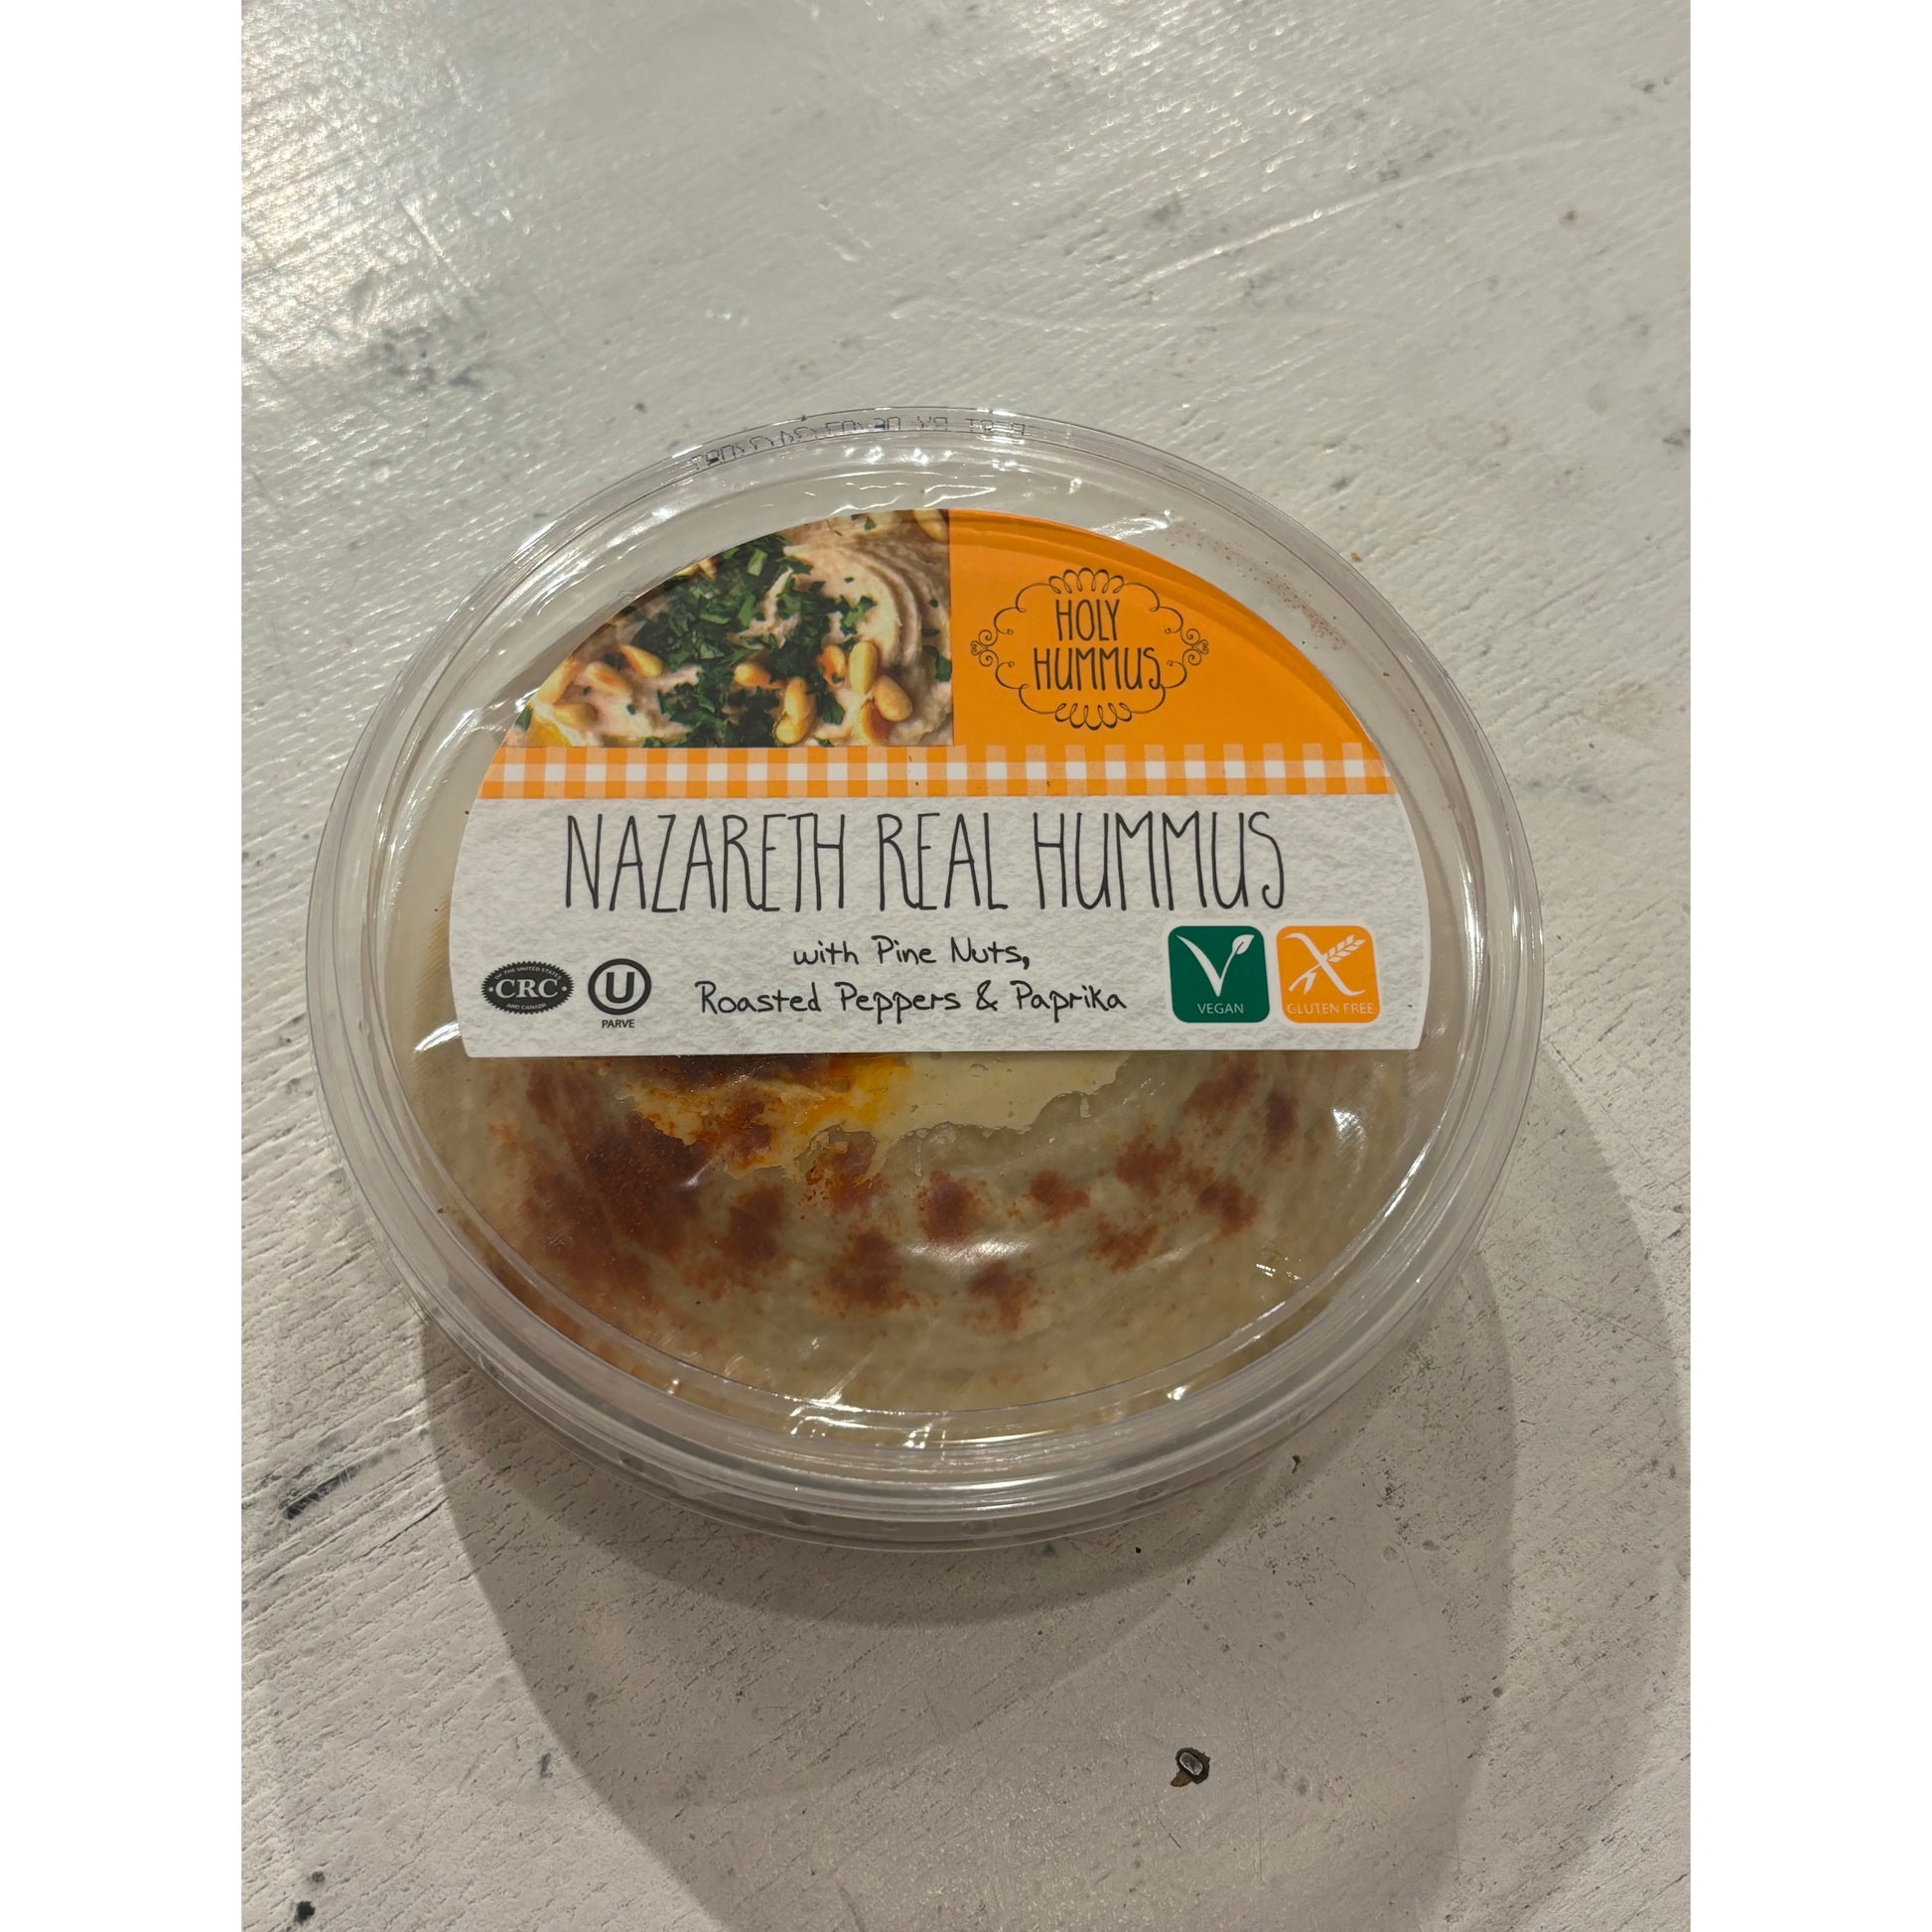 Clear plastic container of "Hummus Nazareth - Holy Hummus" with roasted peppers and pine nuts, displayed on a white wooden surface.